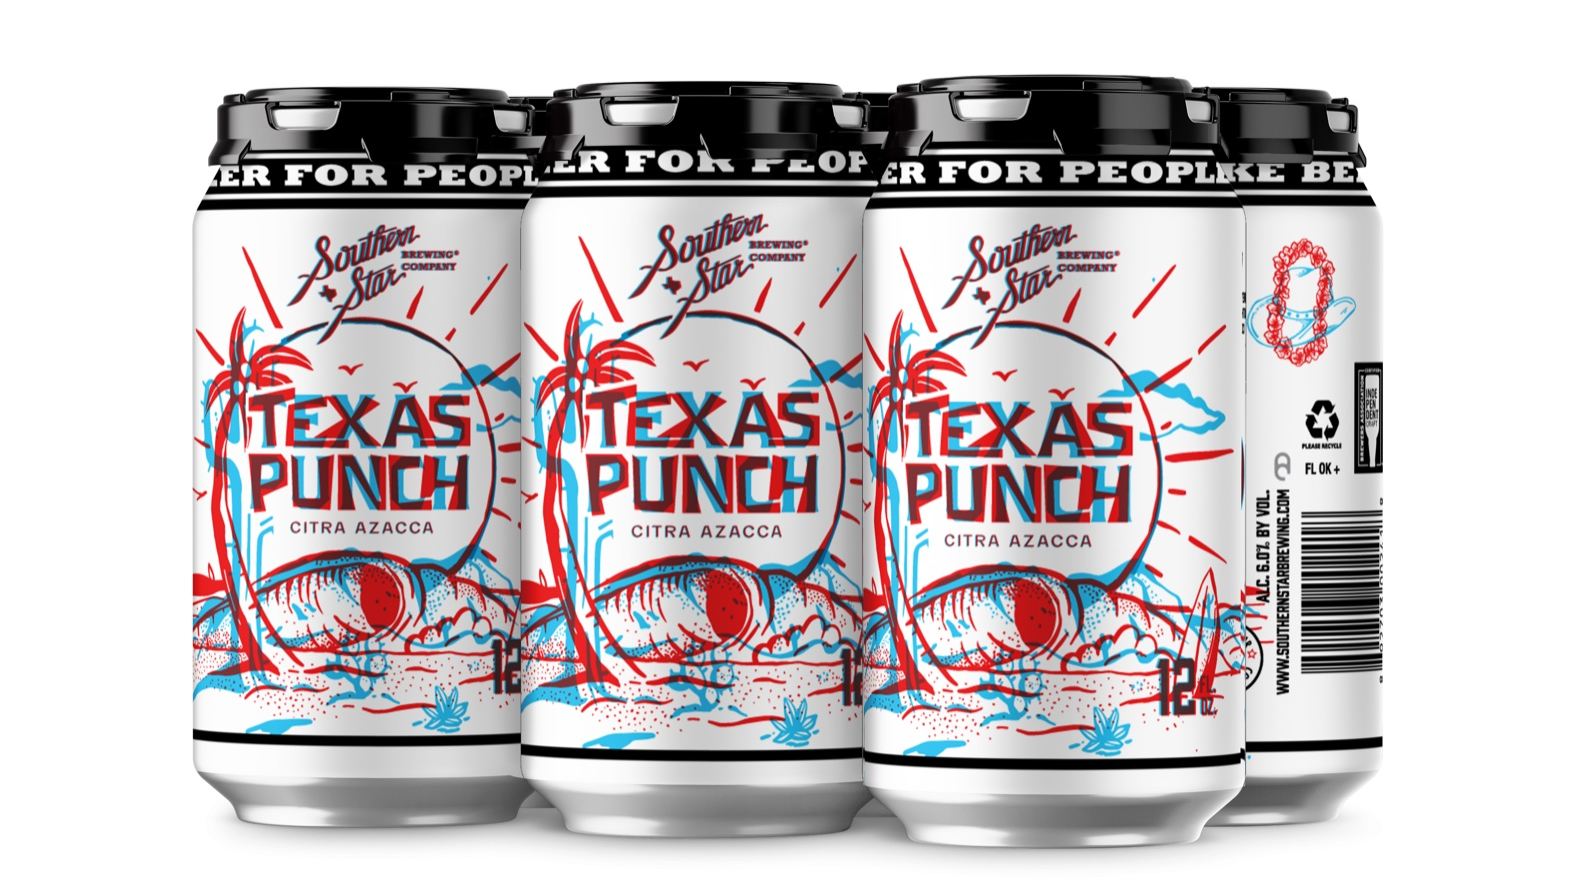 Southern Star Brewing Co.’s Texas Punch Beer Features A Mesmerizing Anaglyph Design